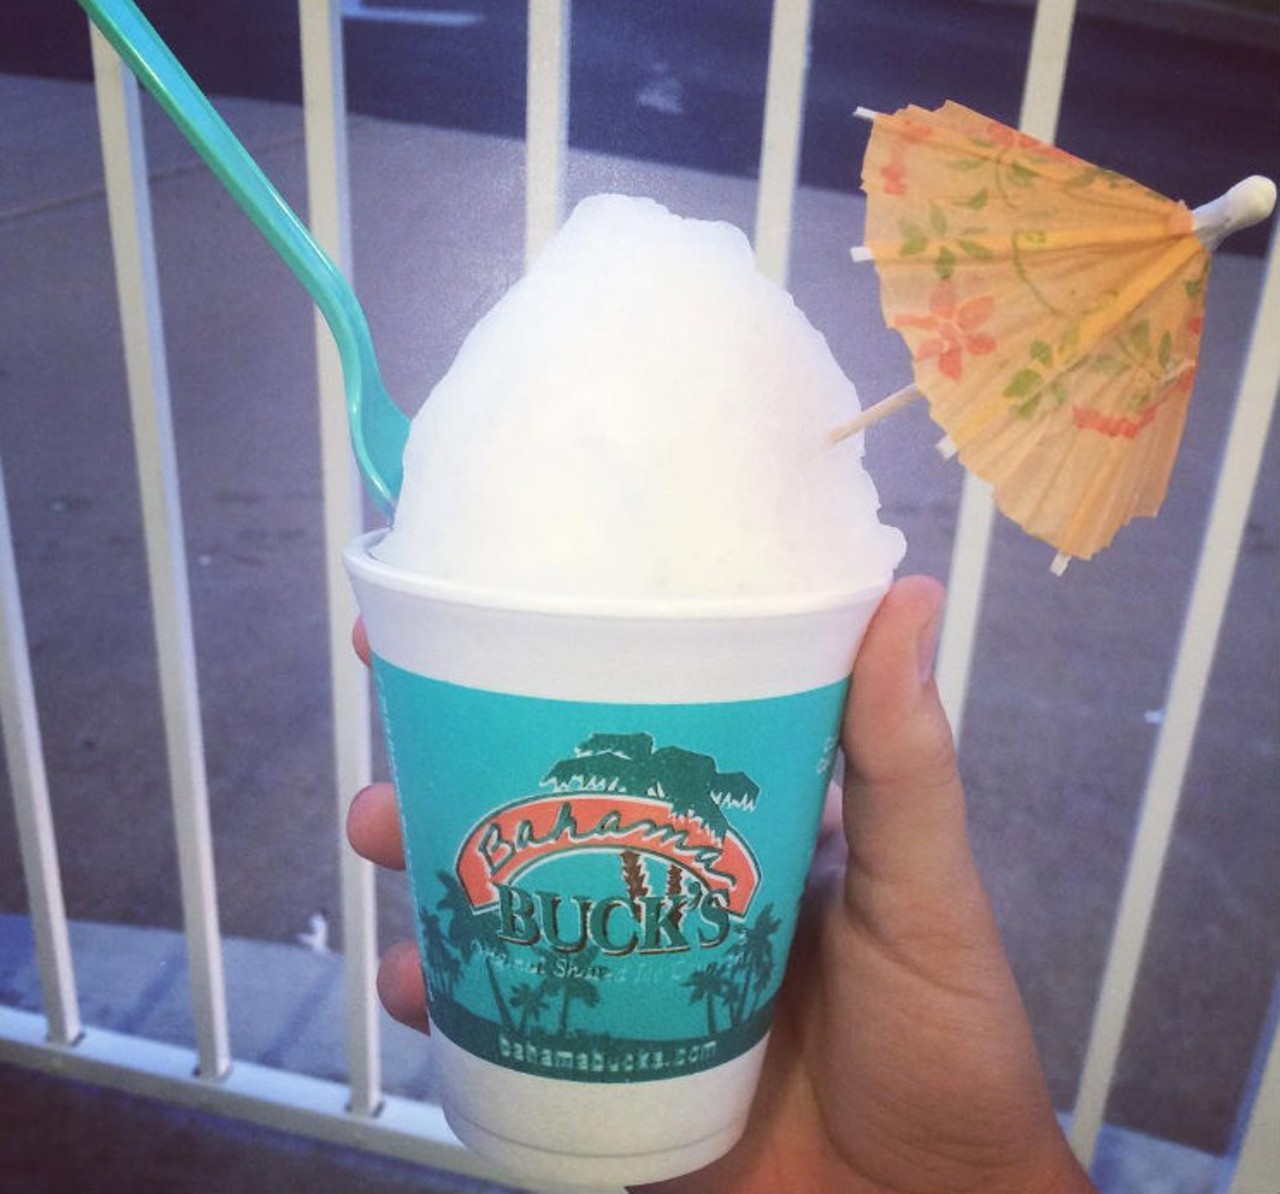 Bahama Bucks
661 Salt Lick Rd., St. Peters, MO 63376
(636) 272-1118
There's nothing better during the hot summer than a snow cone with a pretty umbrella on the side -- and you can get that at Bahama Bucks. Sure, it's a chain; but don't turn your nose up at giving it a try. Plus, Bahama Bucks stays open until 11 p.m., making it a perfect place for your late night snack run. Photo courtesy of Instagram / av.summerusa.